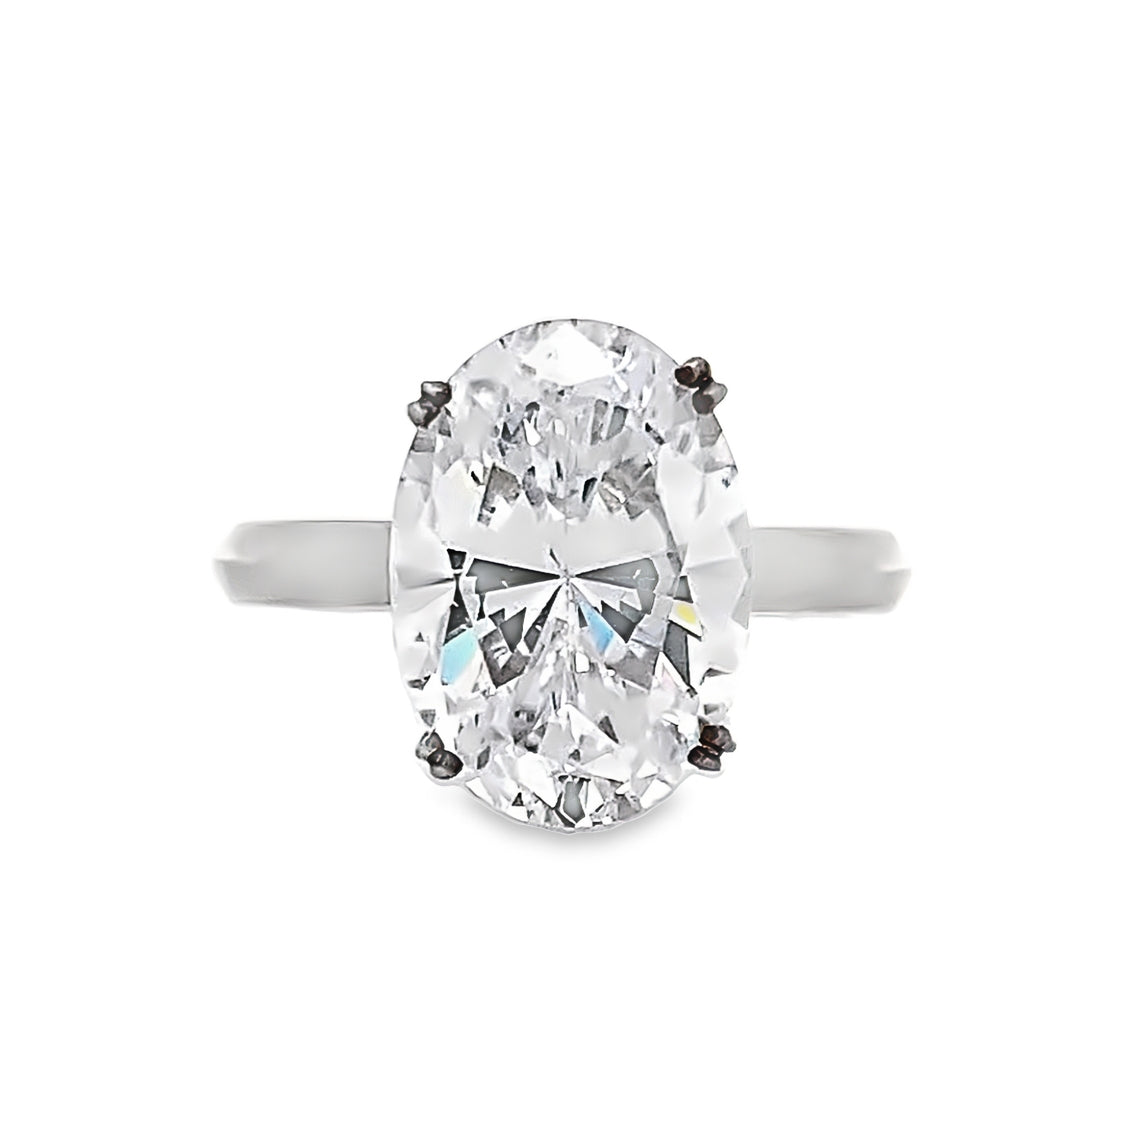 Beeghly & Co. 14 Karat Solitaire Oval Engagement Ring BCR-12